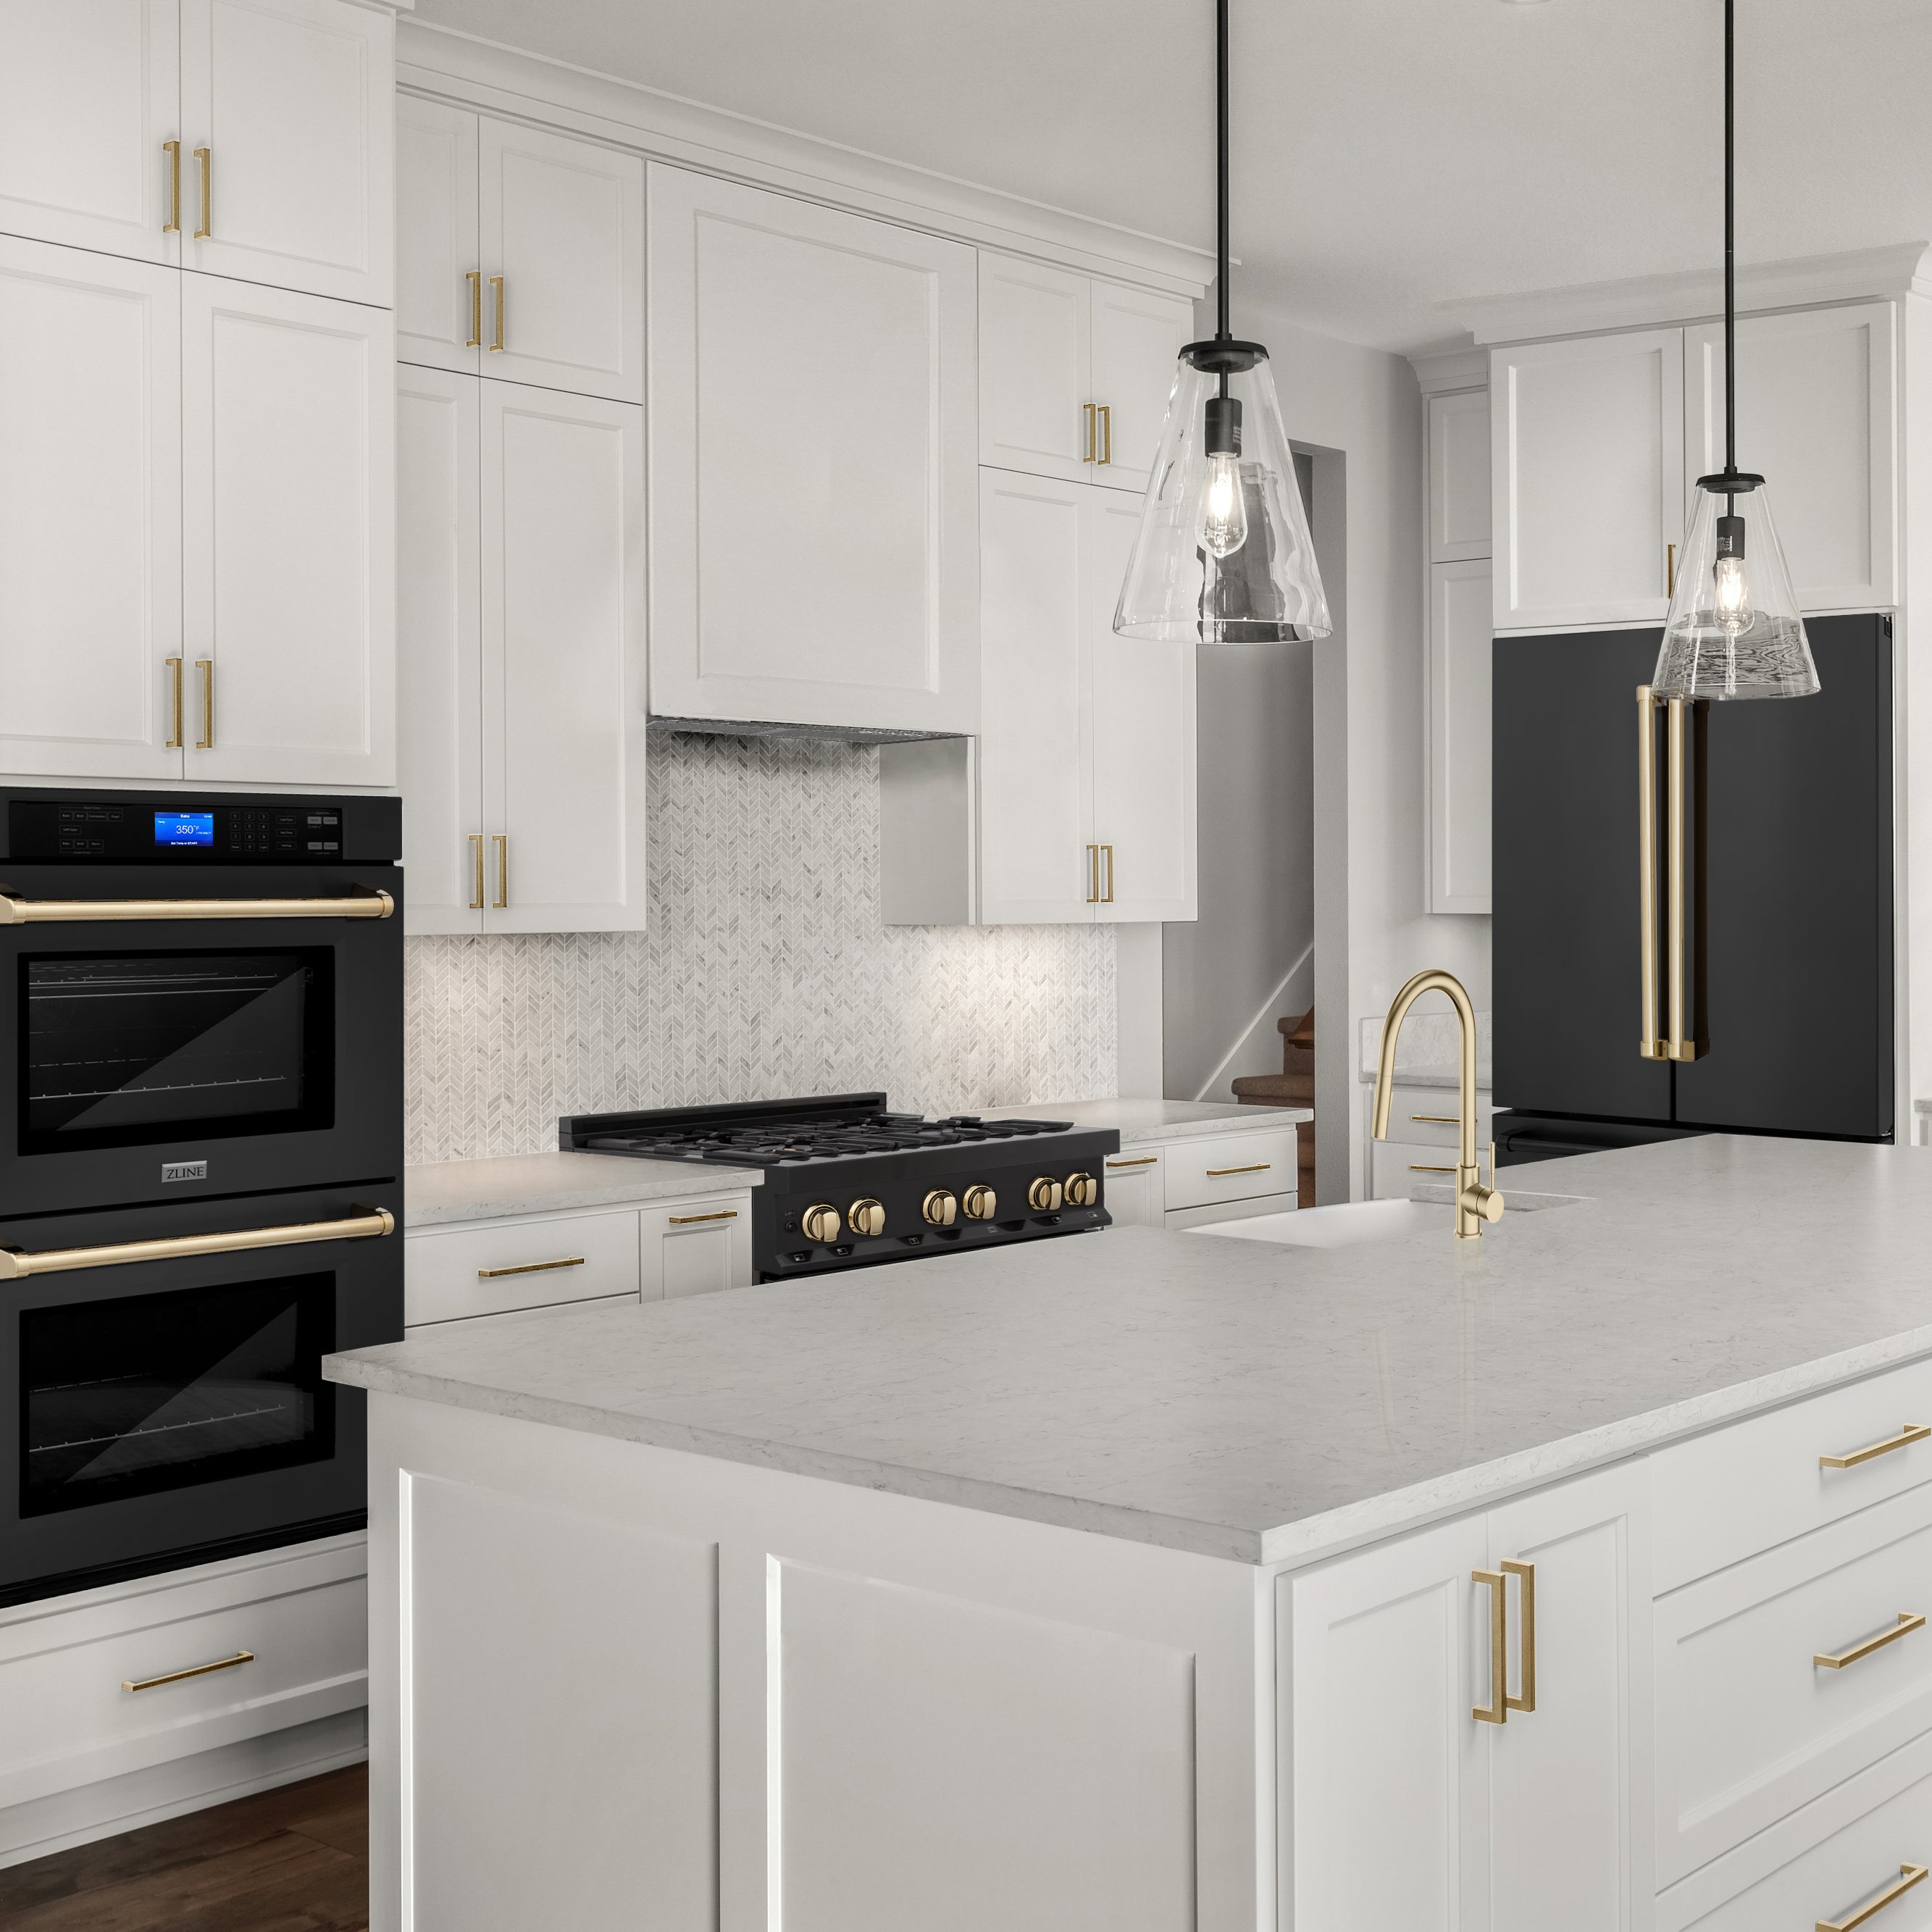 Black stainless steel kitchen appliances with gold accent handles and knobs in a white luxury kitchen with white marble counters.